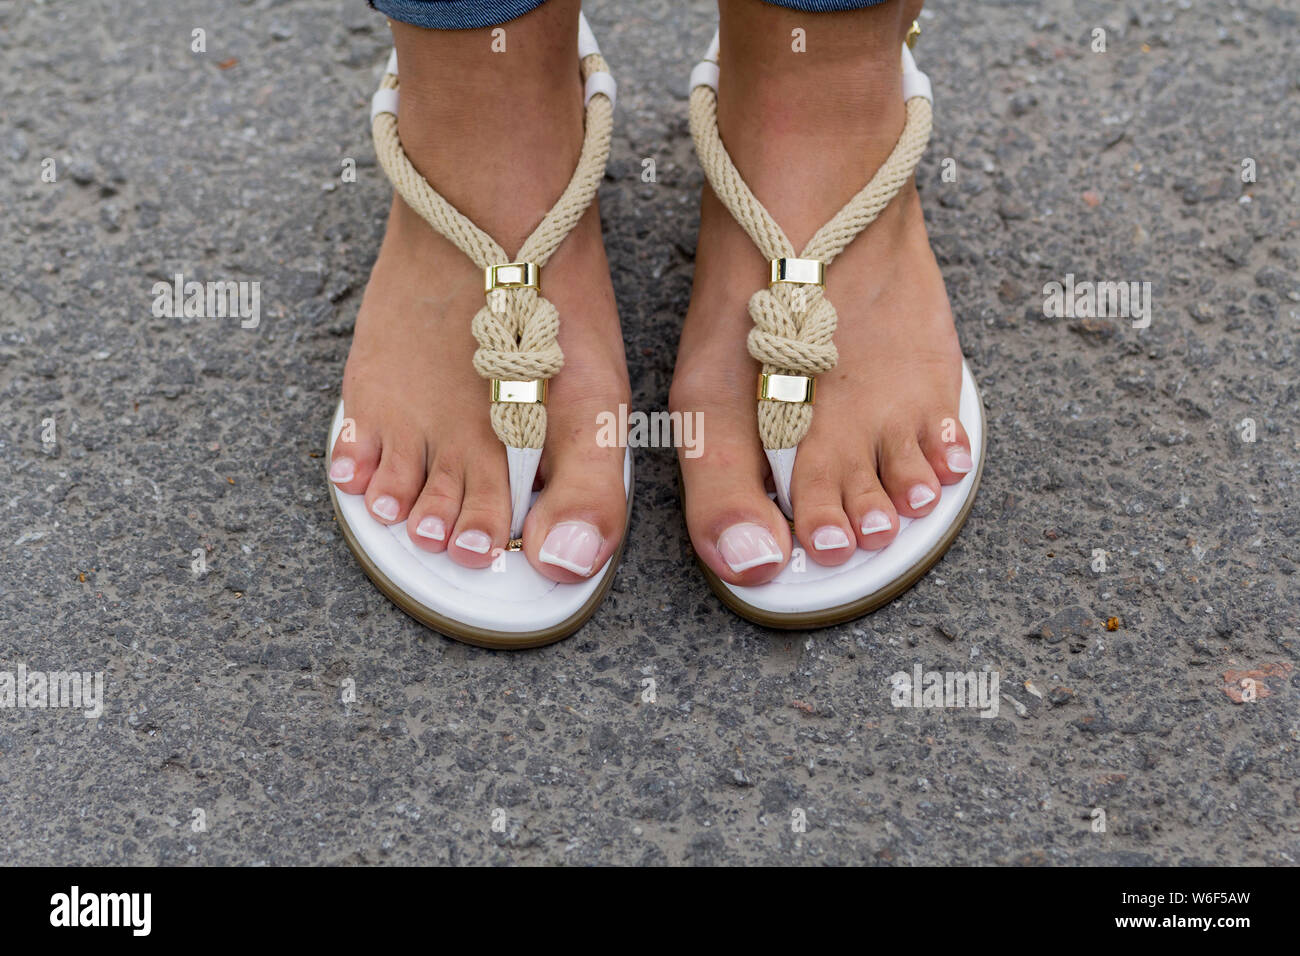 Beautiful Feet Sandals High Resolution Stock Photography and Images - Alamy